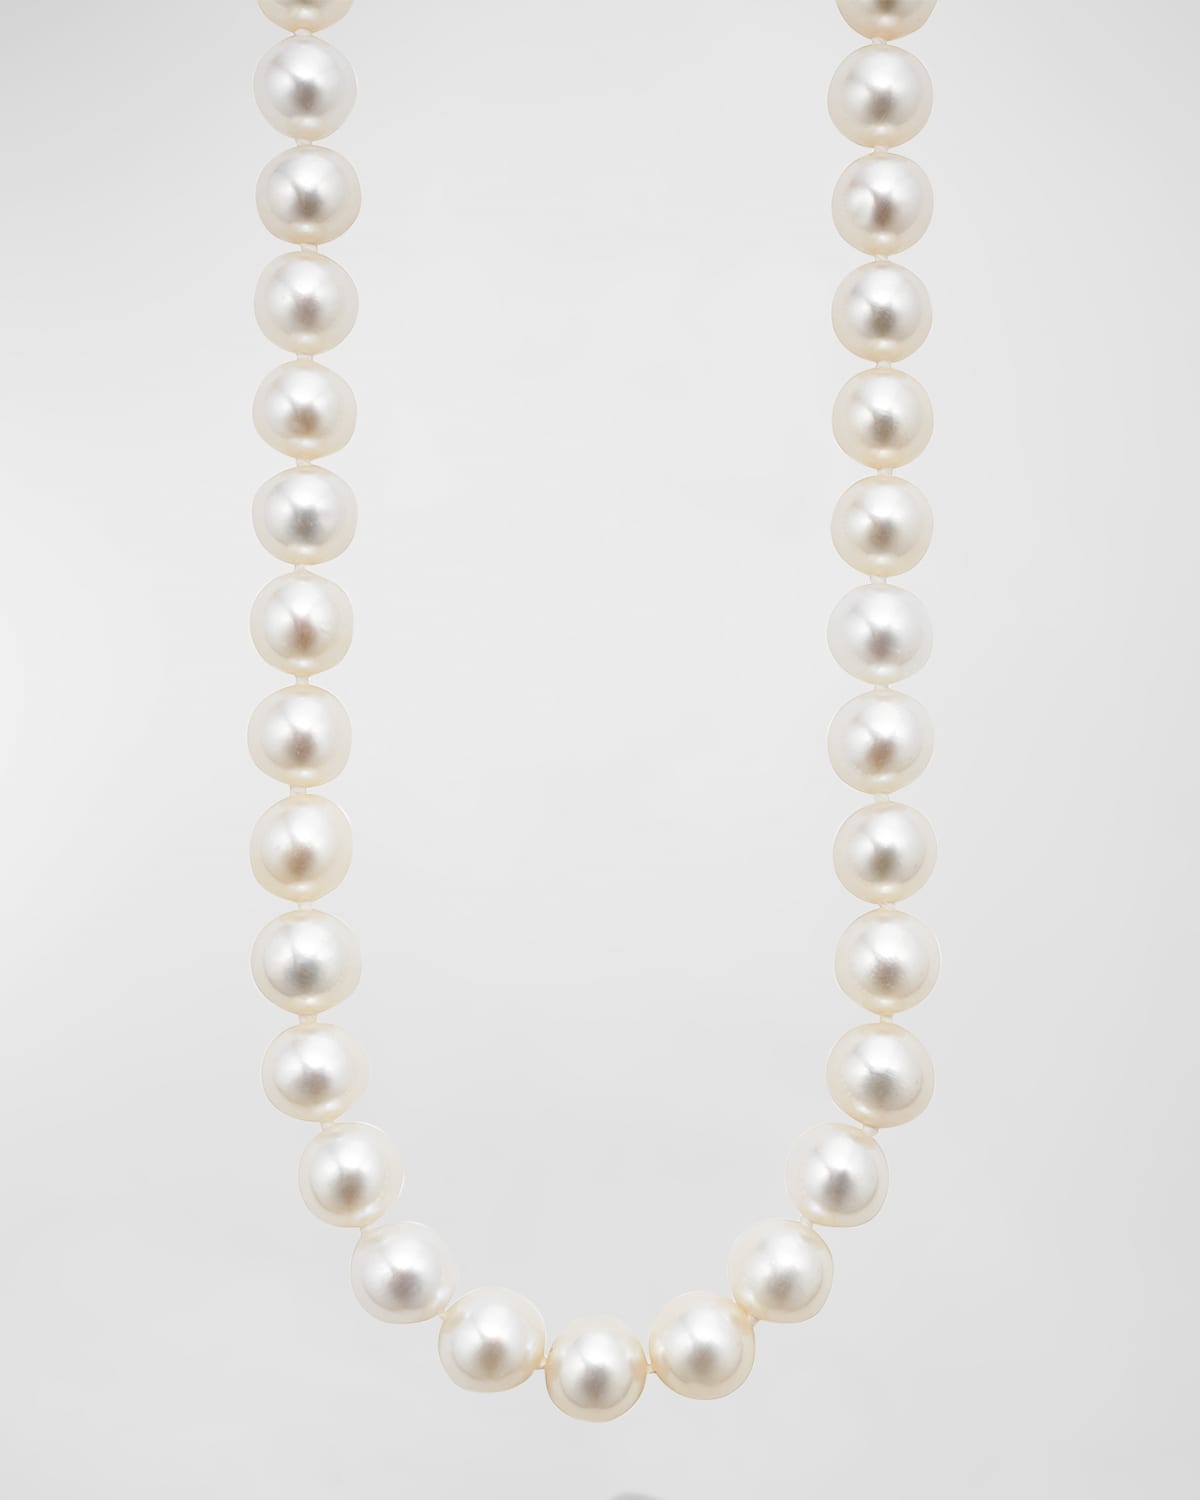 LAGOS STERLING SILVER AND 18K LUNA PEARL STRAND NECKLACE